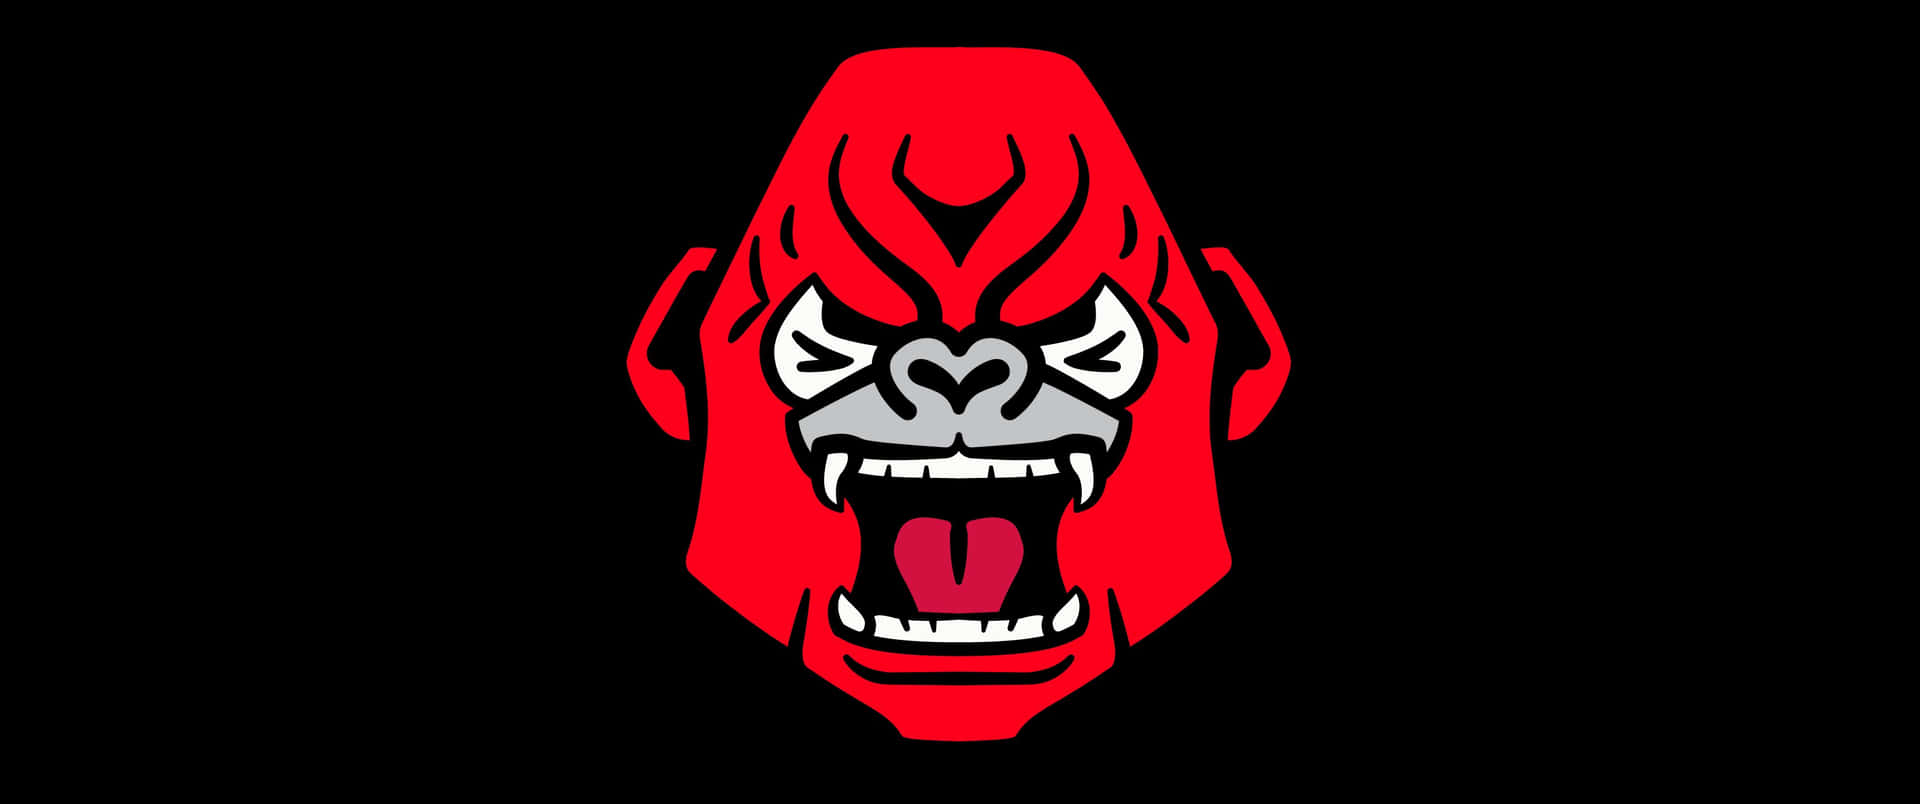 3440x1440p Red Gorilla Canines Background